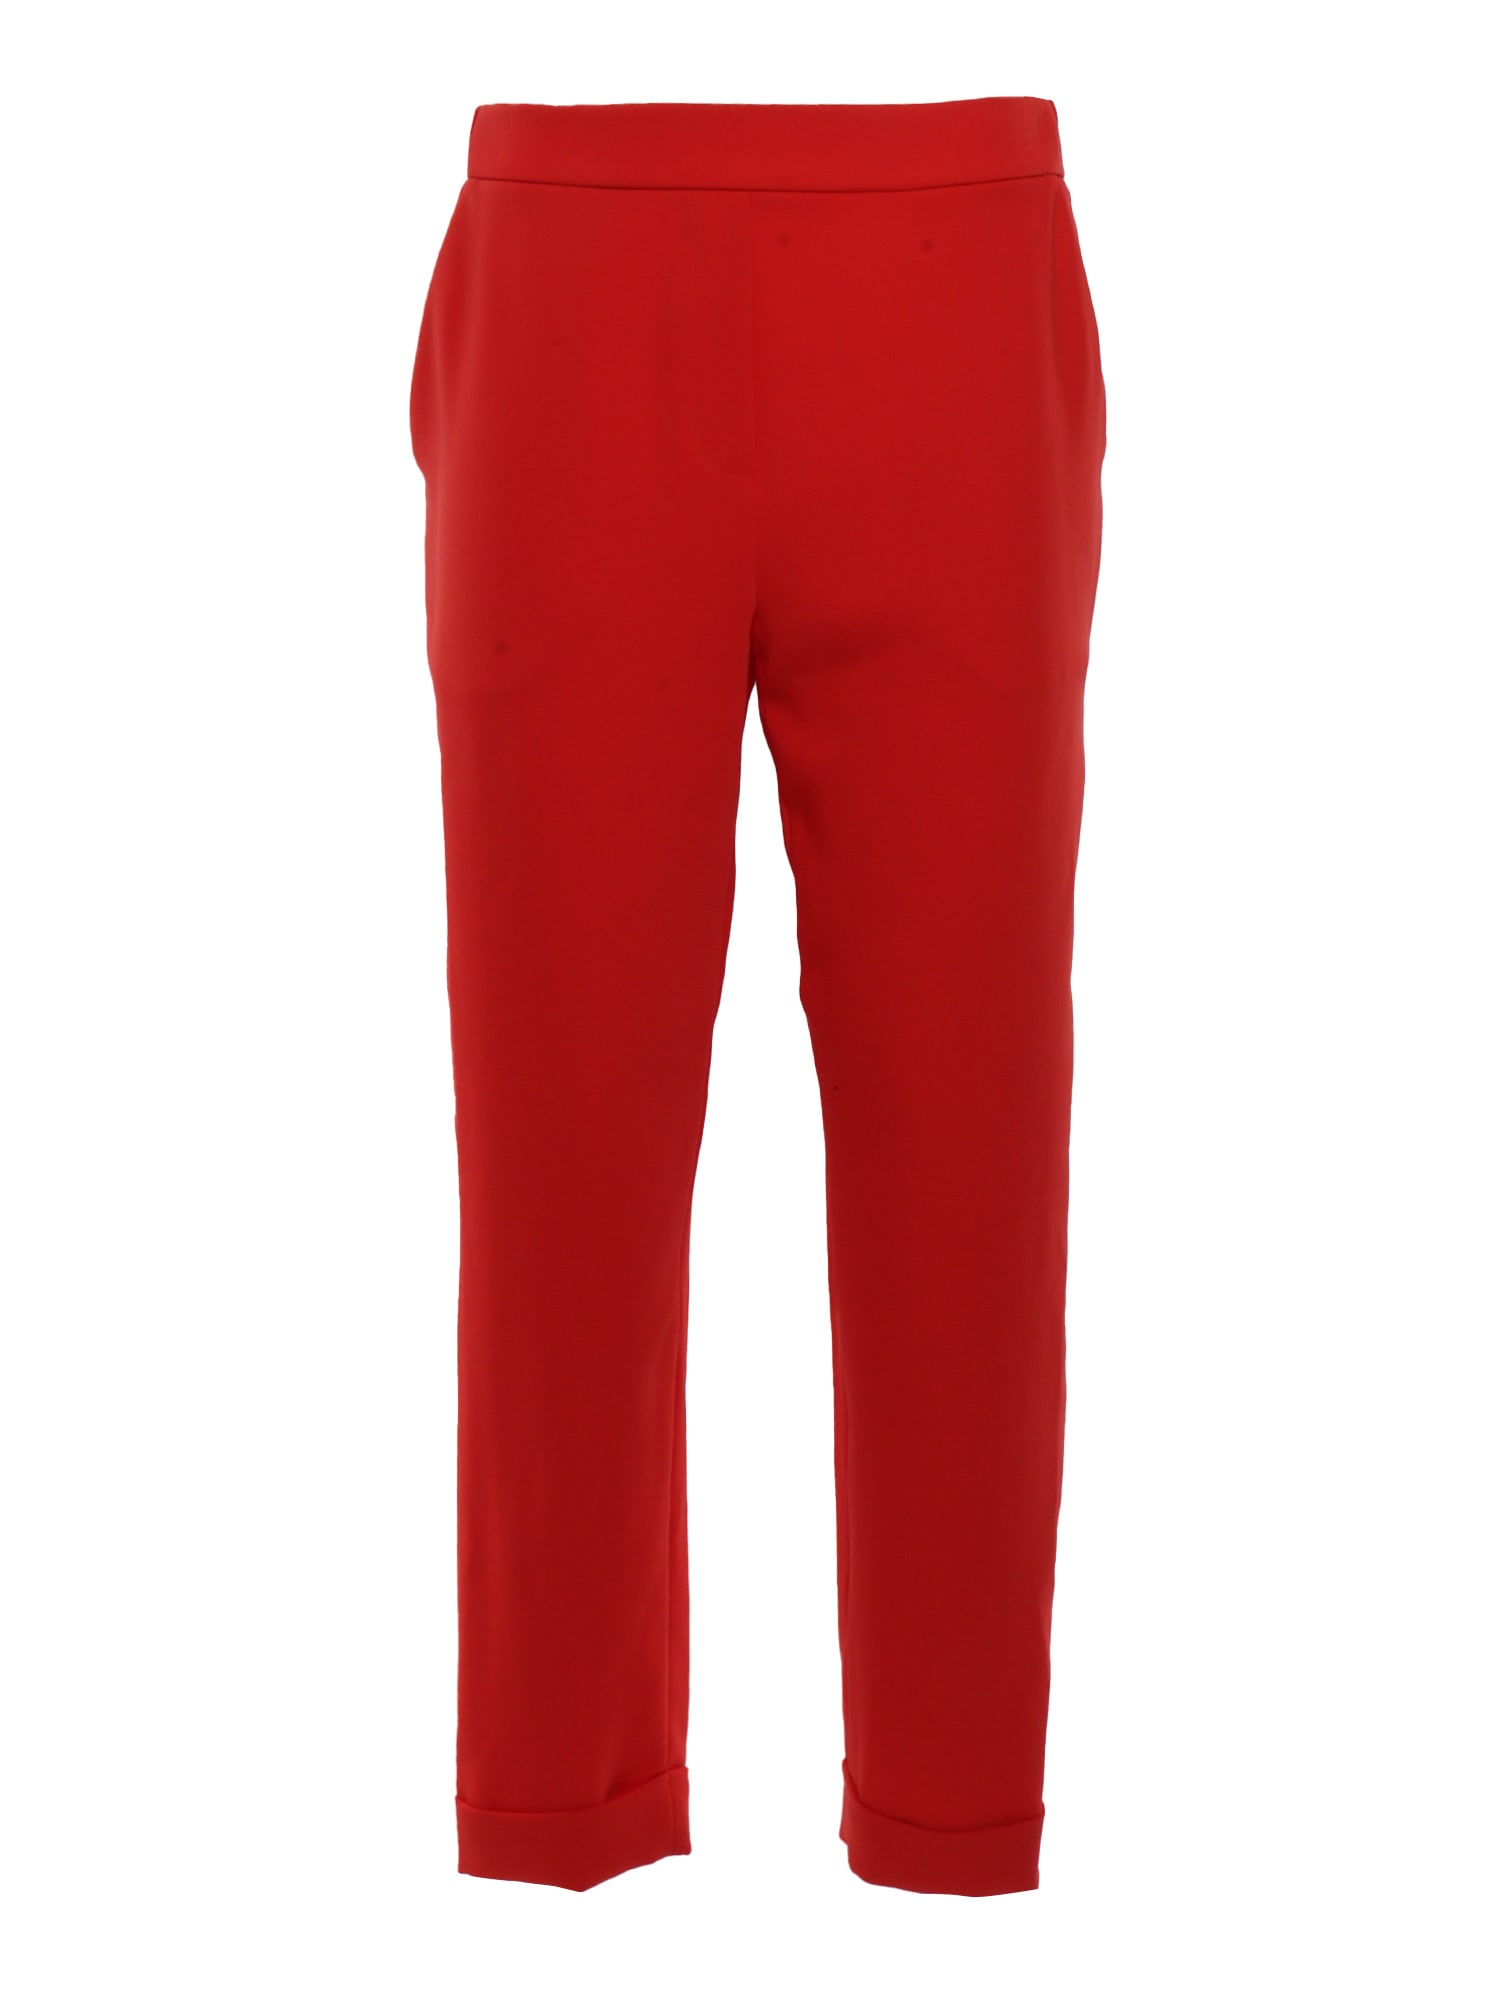 Shop P.a.r.o.s.h Red Trousers